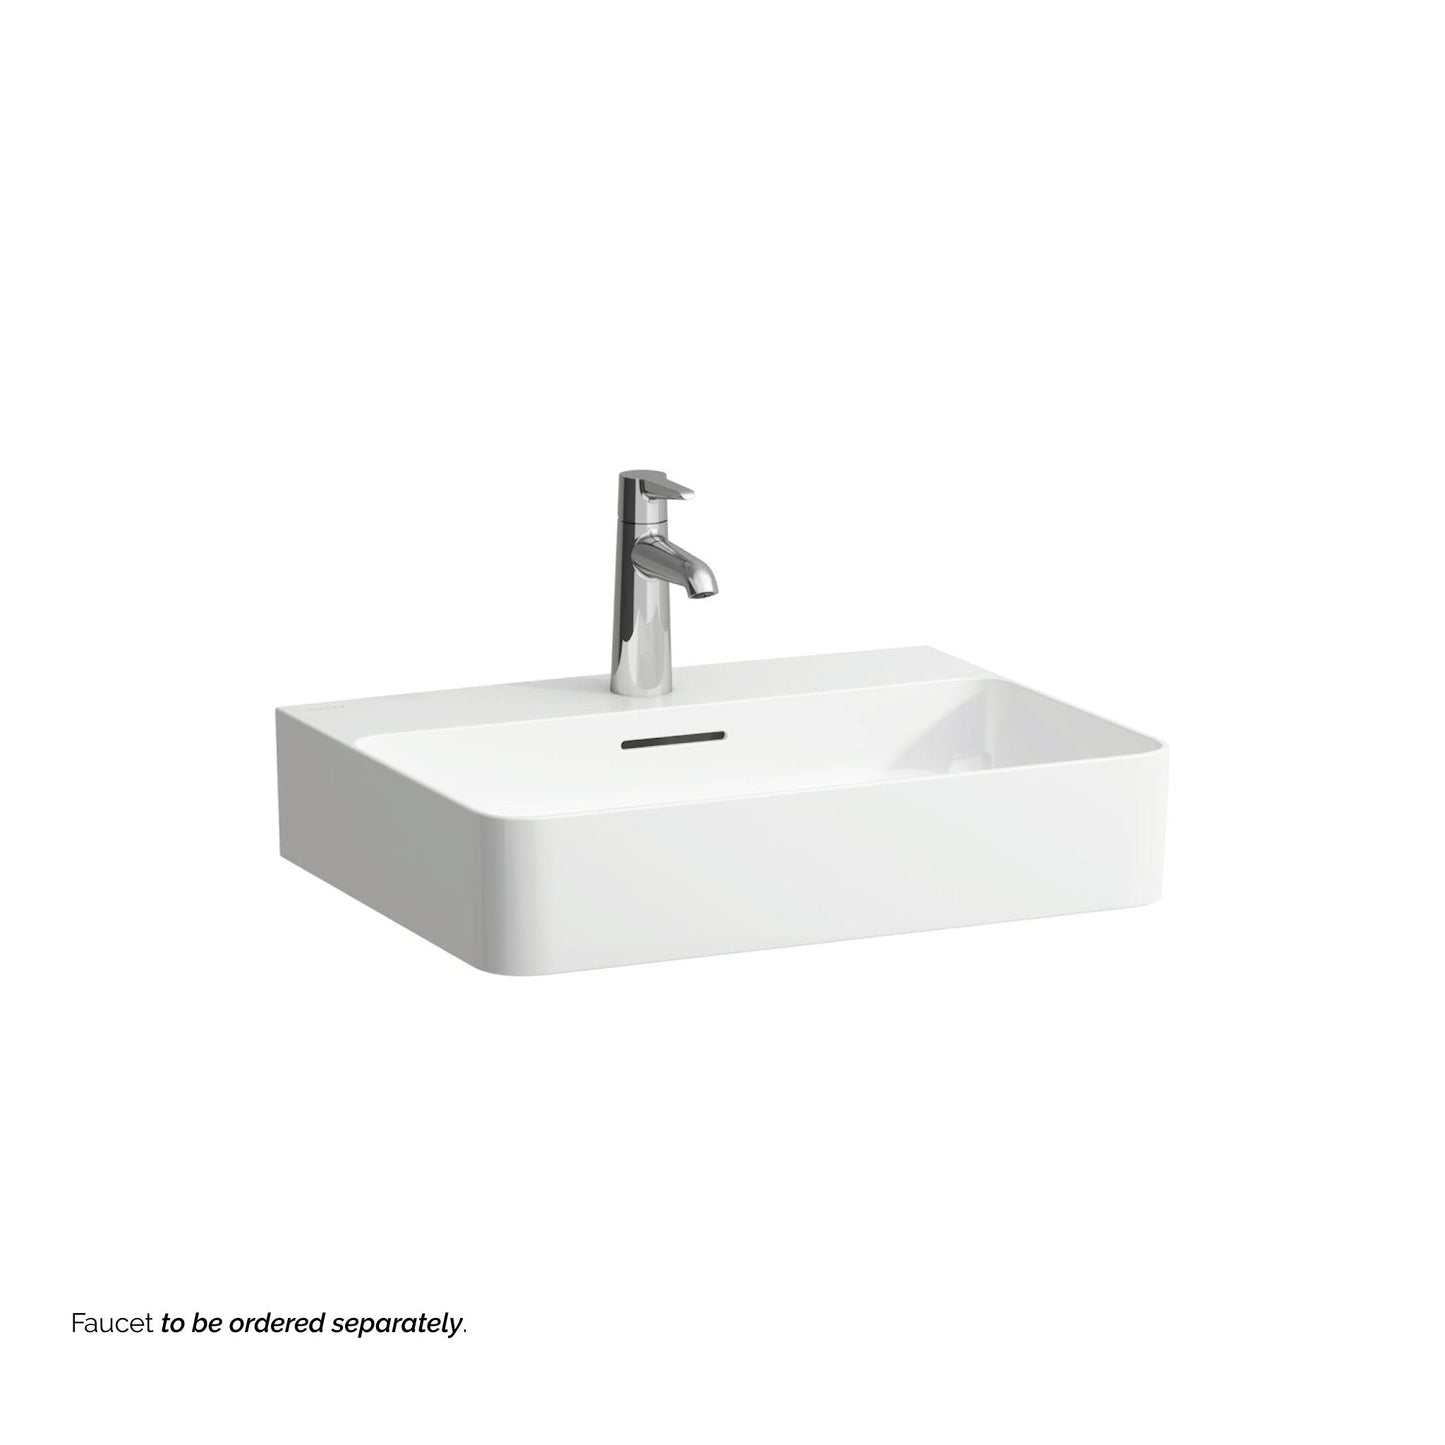 Laufen Val 22" x 17" White Ceramic Countertop Bathroom Sink With Faucet Hole